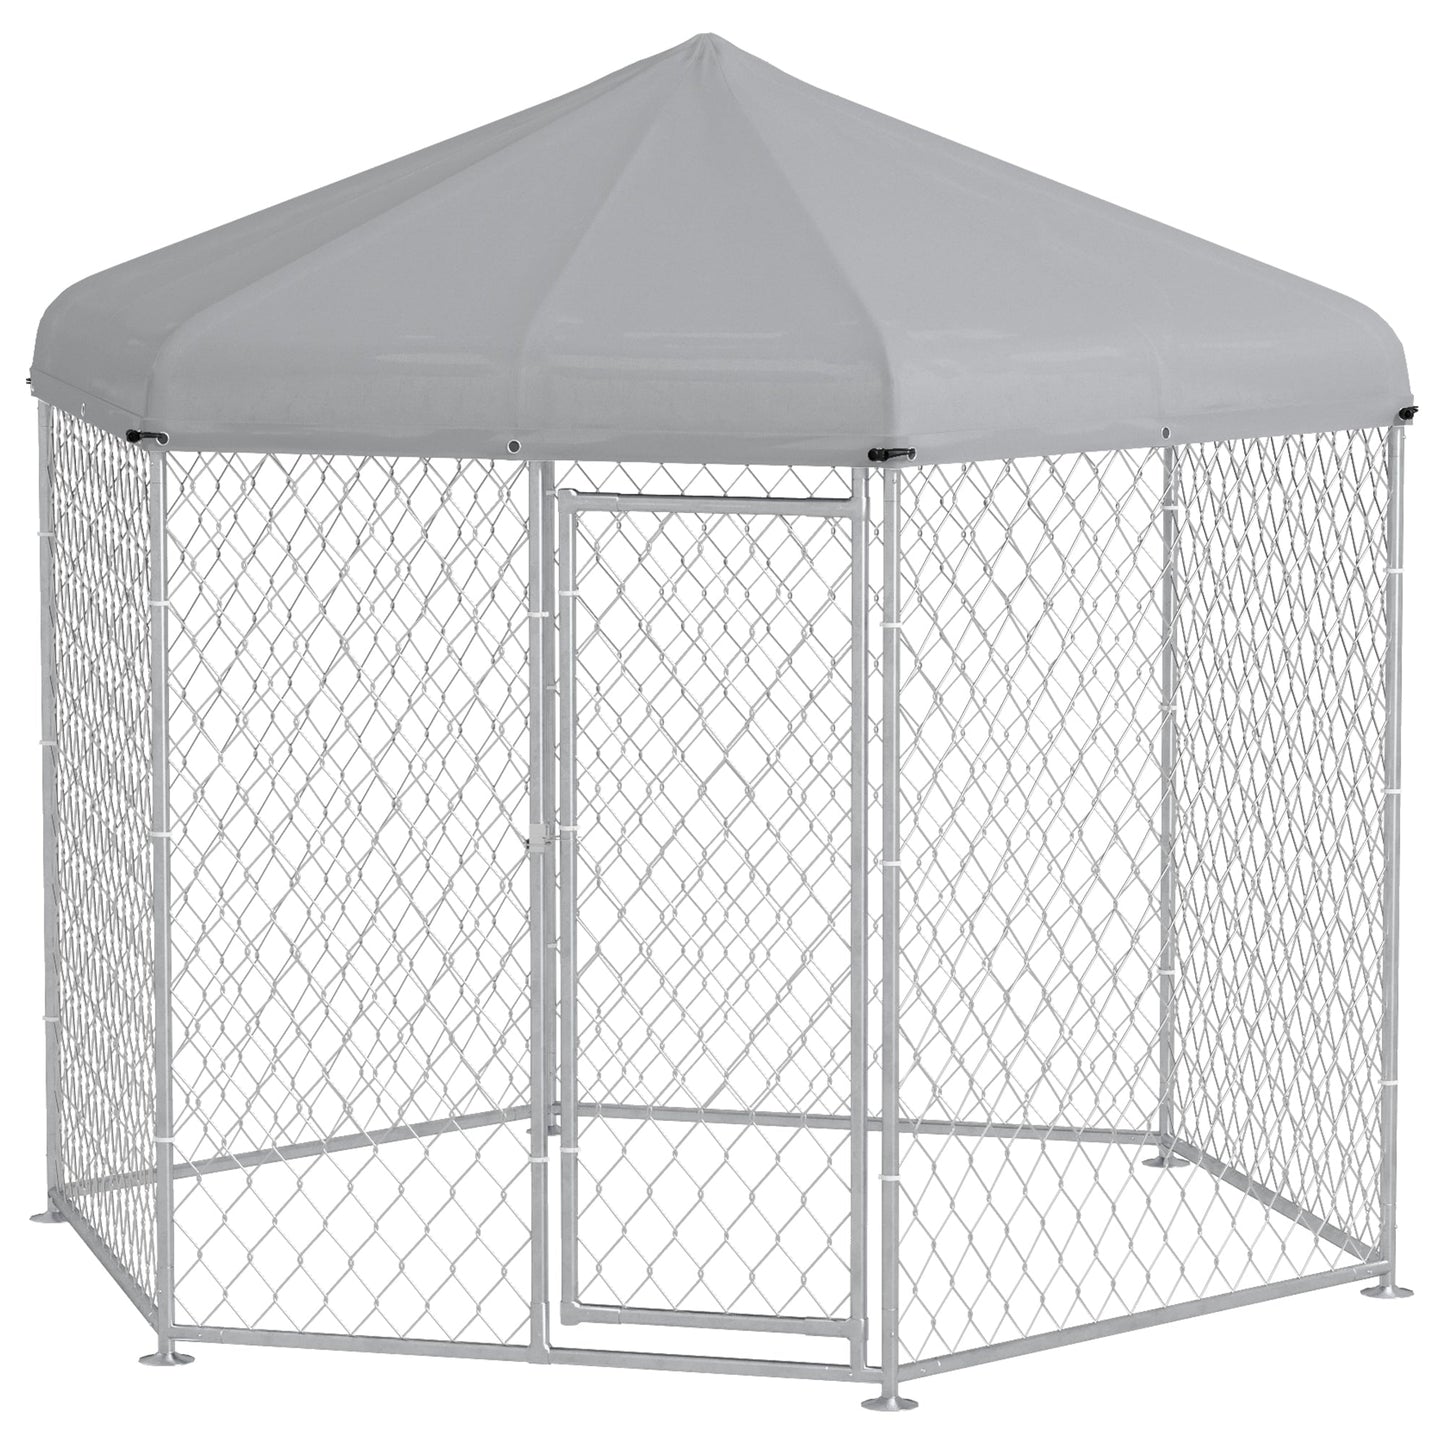 -PawHut 9.2' x 8' x 7.7' Dog Kennel Outdoor for Medium and Large-Sized Dogs with Waterproof UV Resistant Roof, Silver - Outdoor Style Company